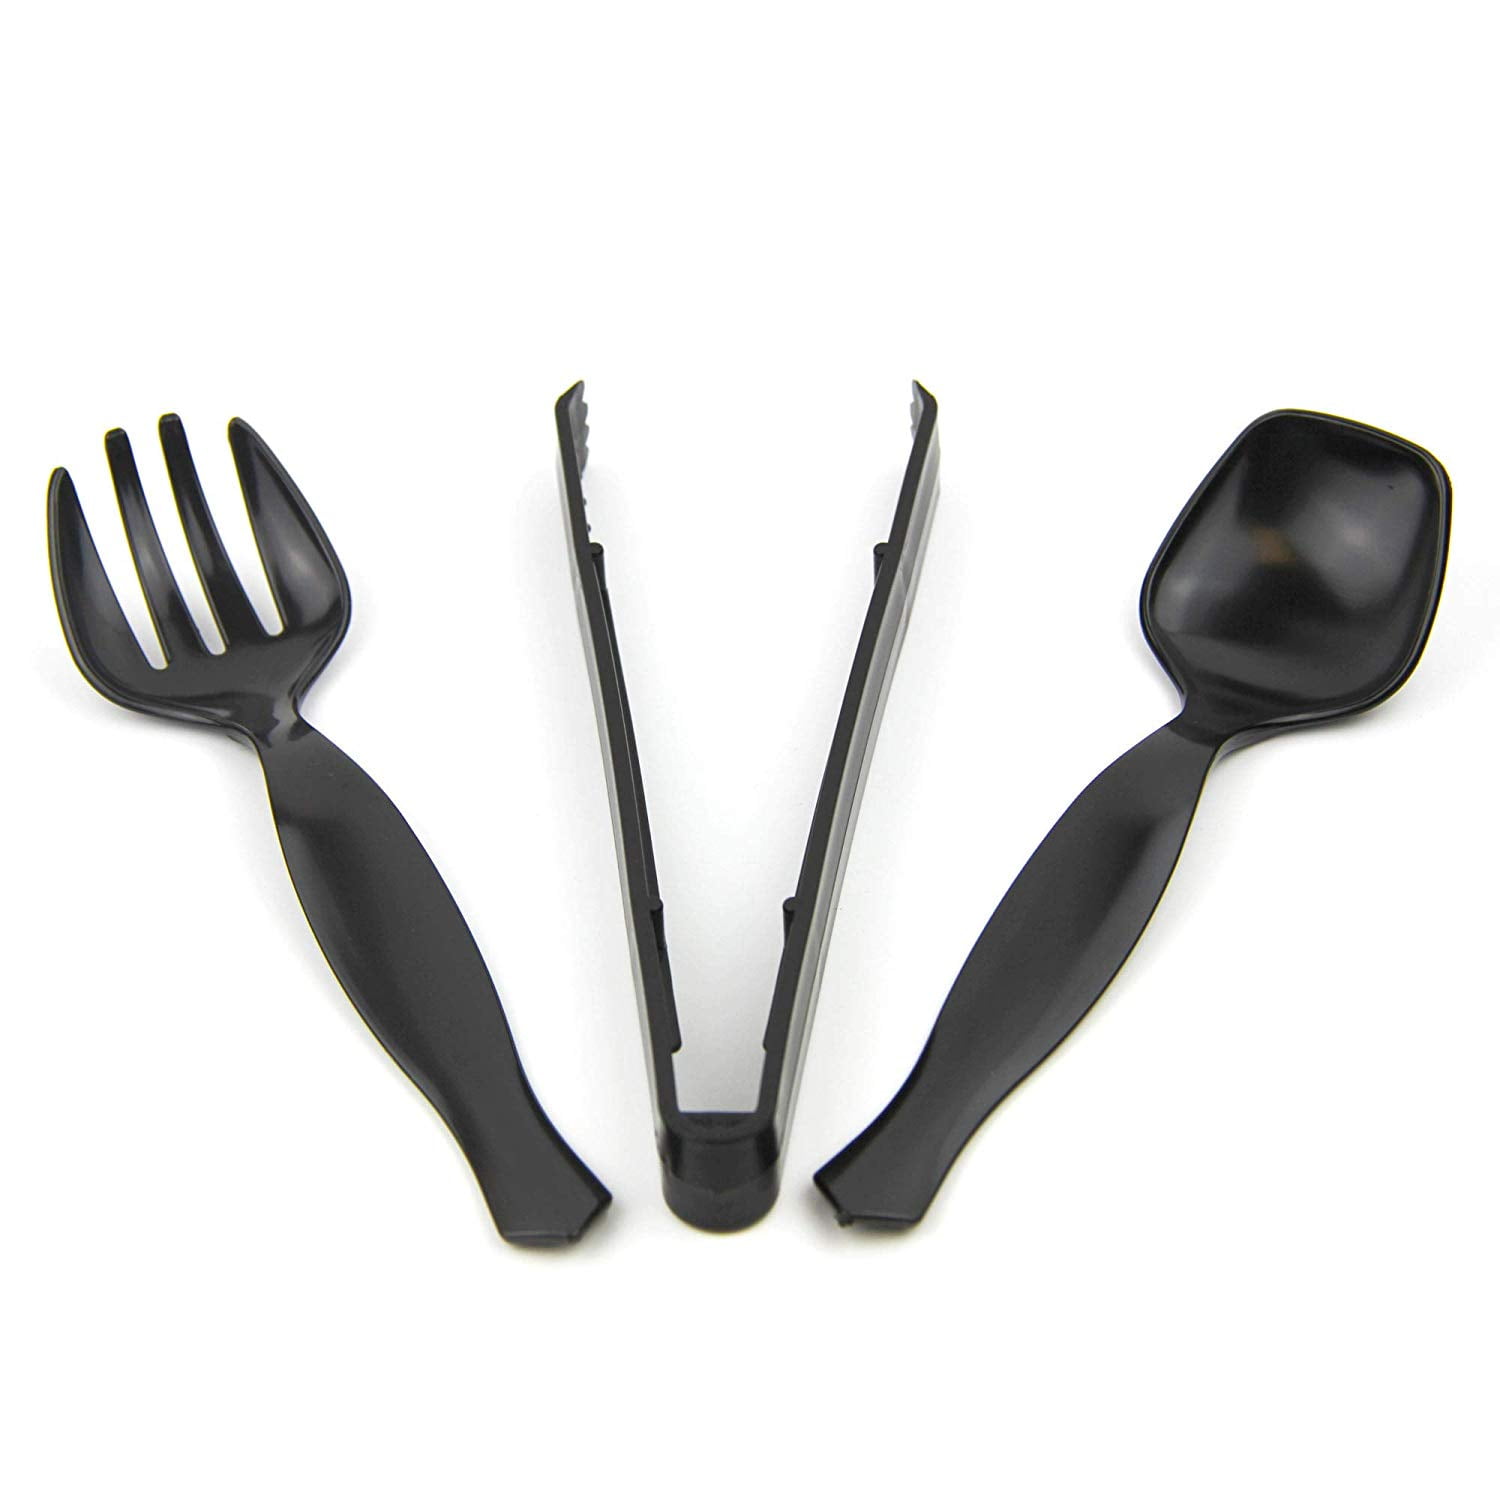 Details about   NEW Disposable Black Plastic Heavy Duty Serving Spoon & Tongs 19 Each FREE SHIP 